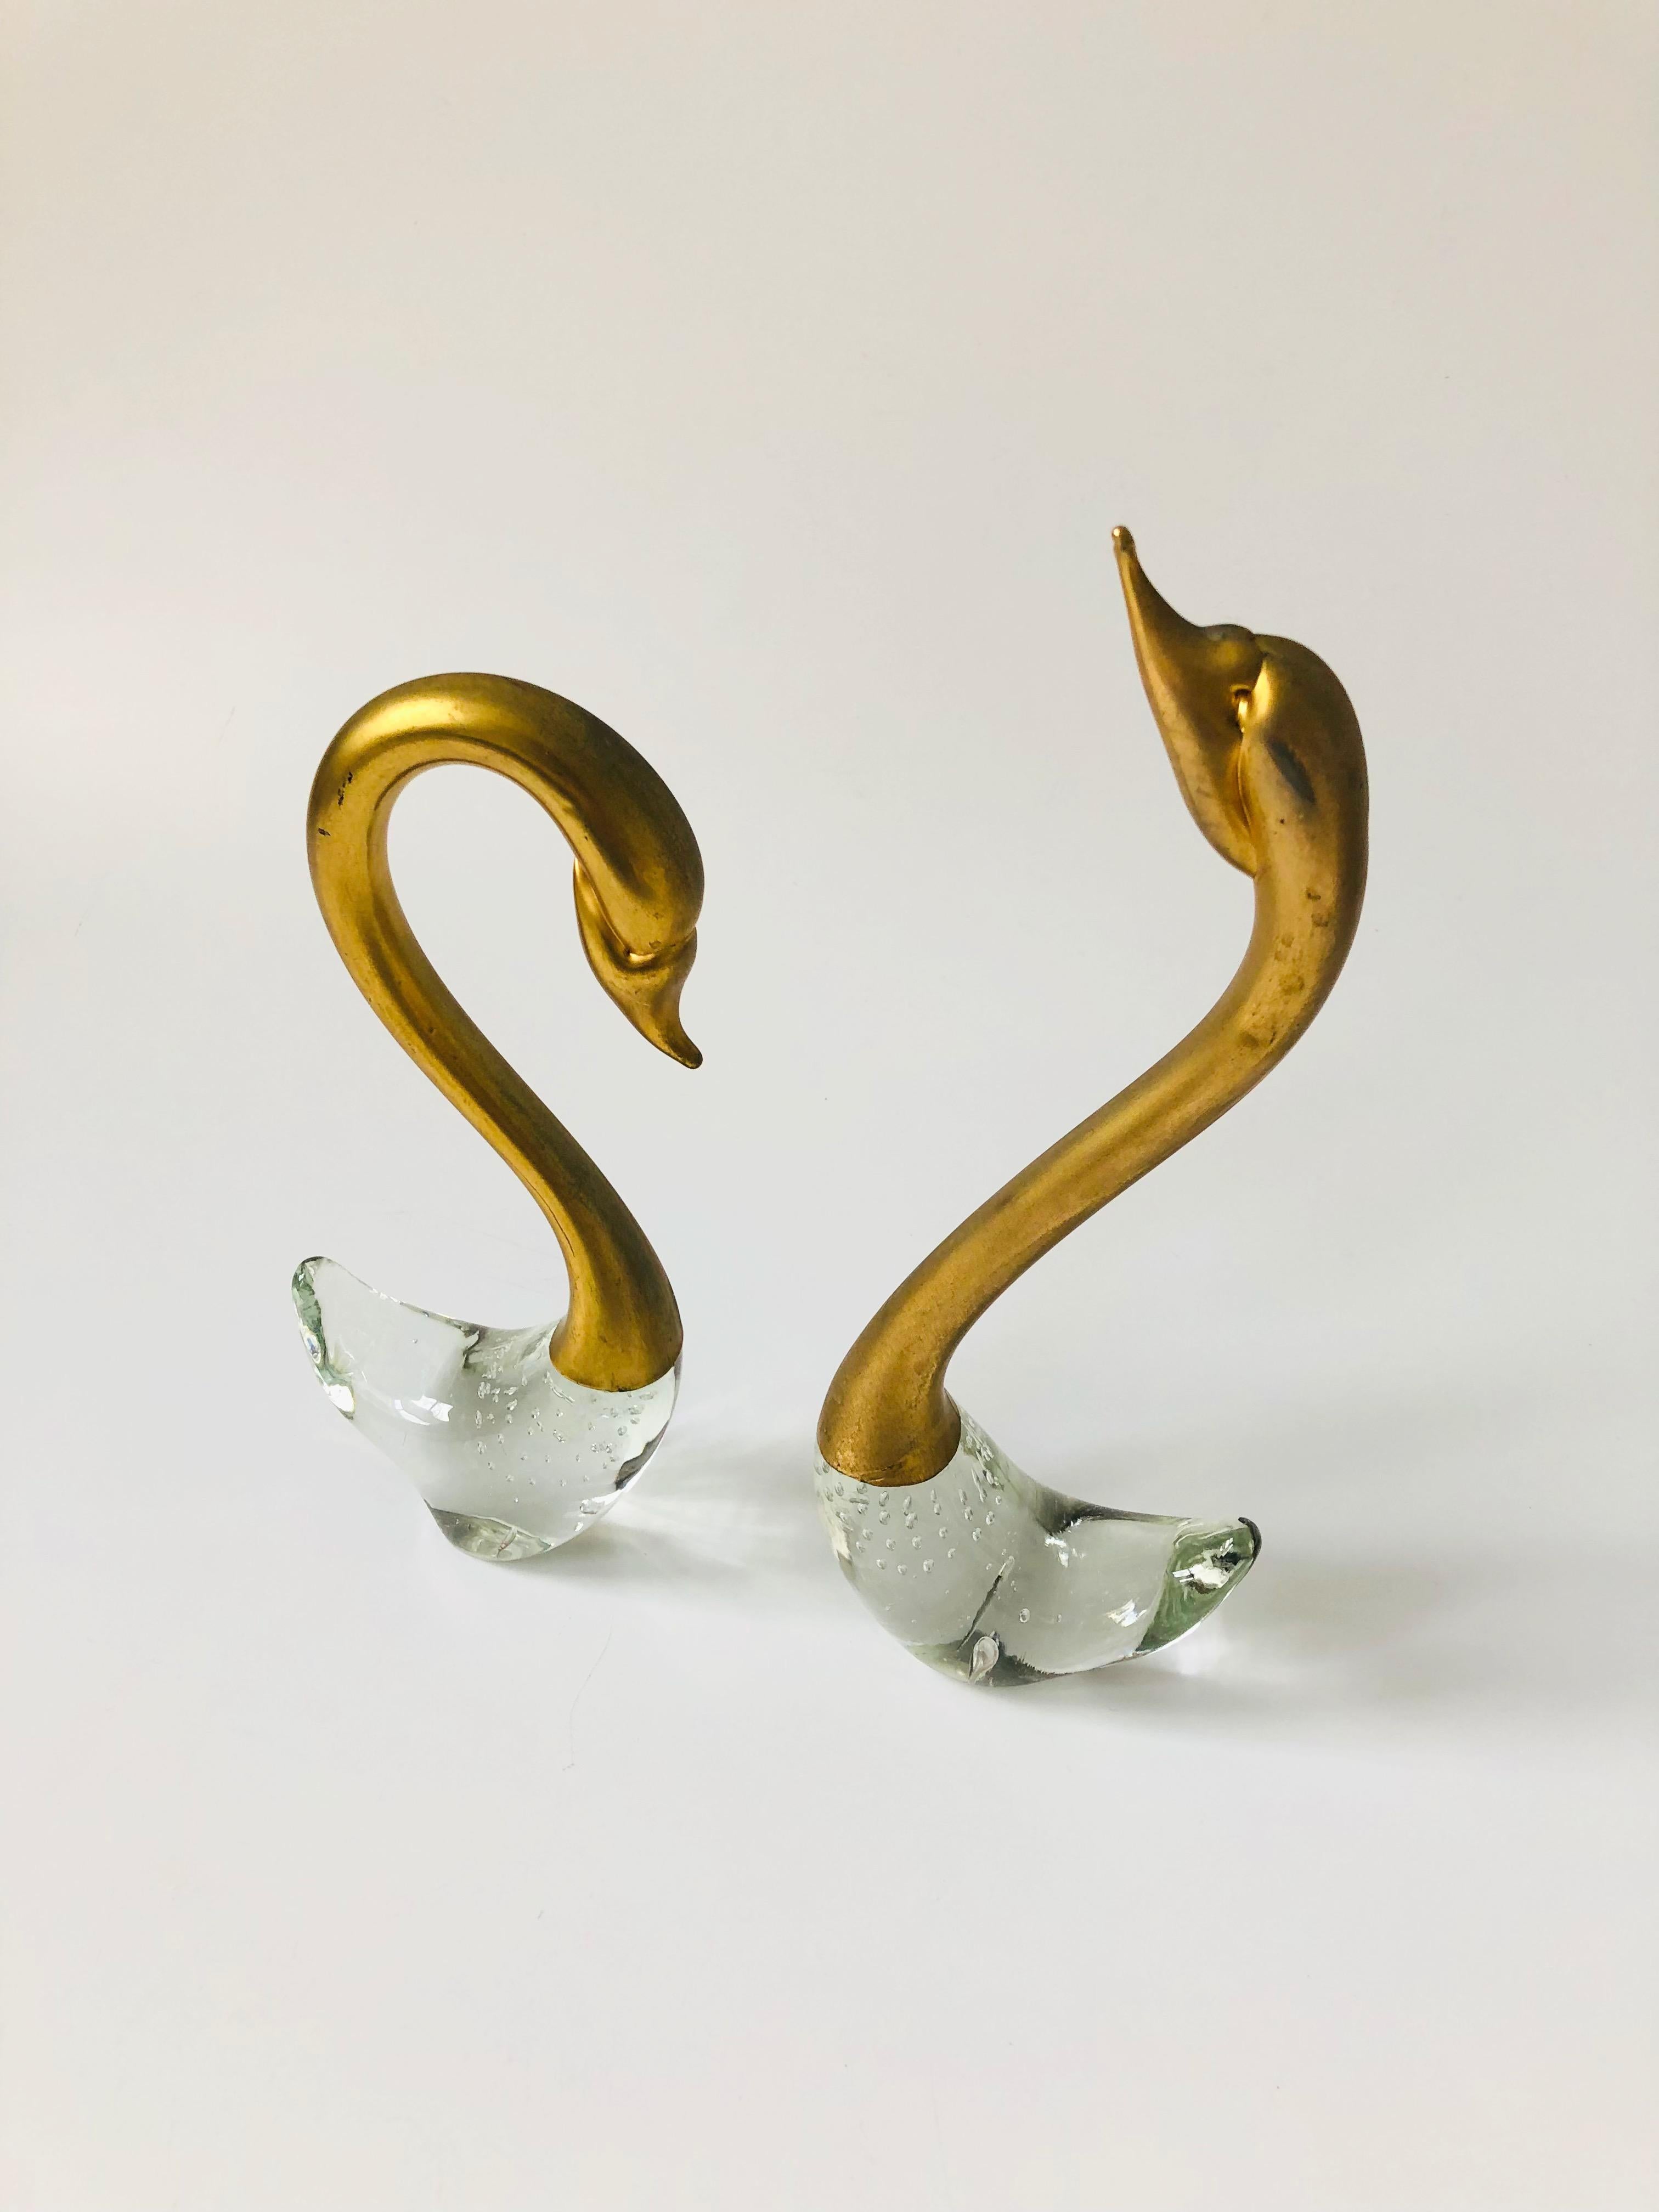 A pair of vintage art glass swans. Beautiful elegant shapes with brass tops and clear bases. Nice controlled bubble detailing to the bases.
The taller swan measures 3.5